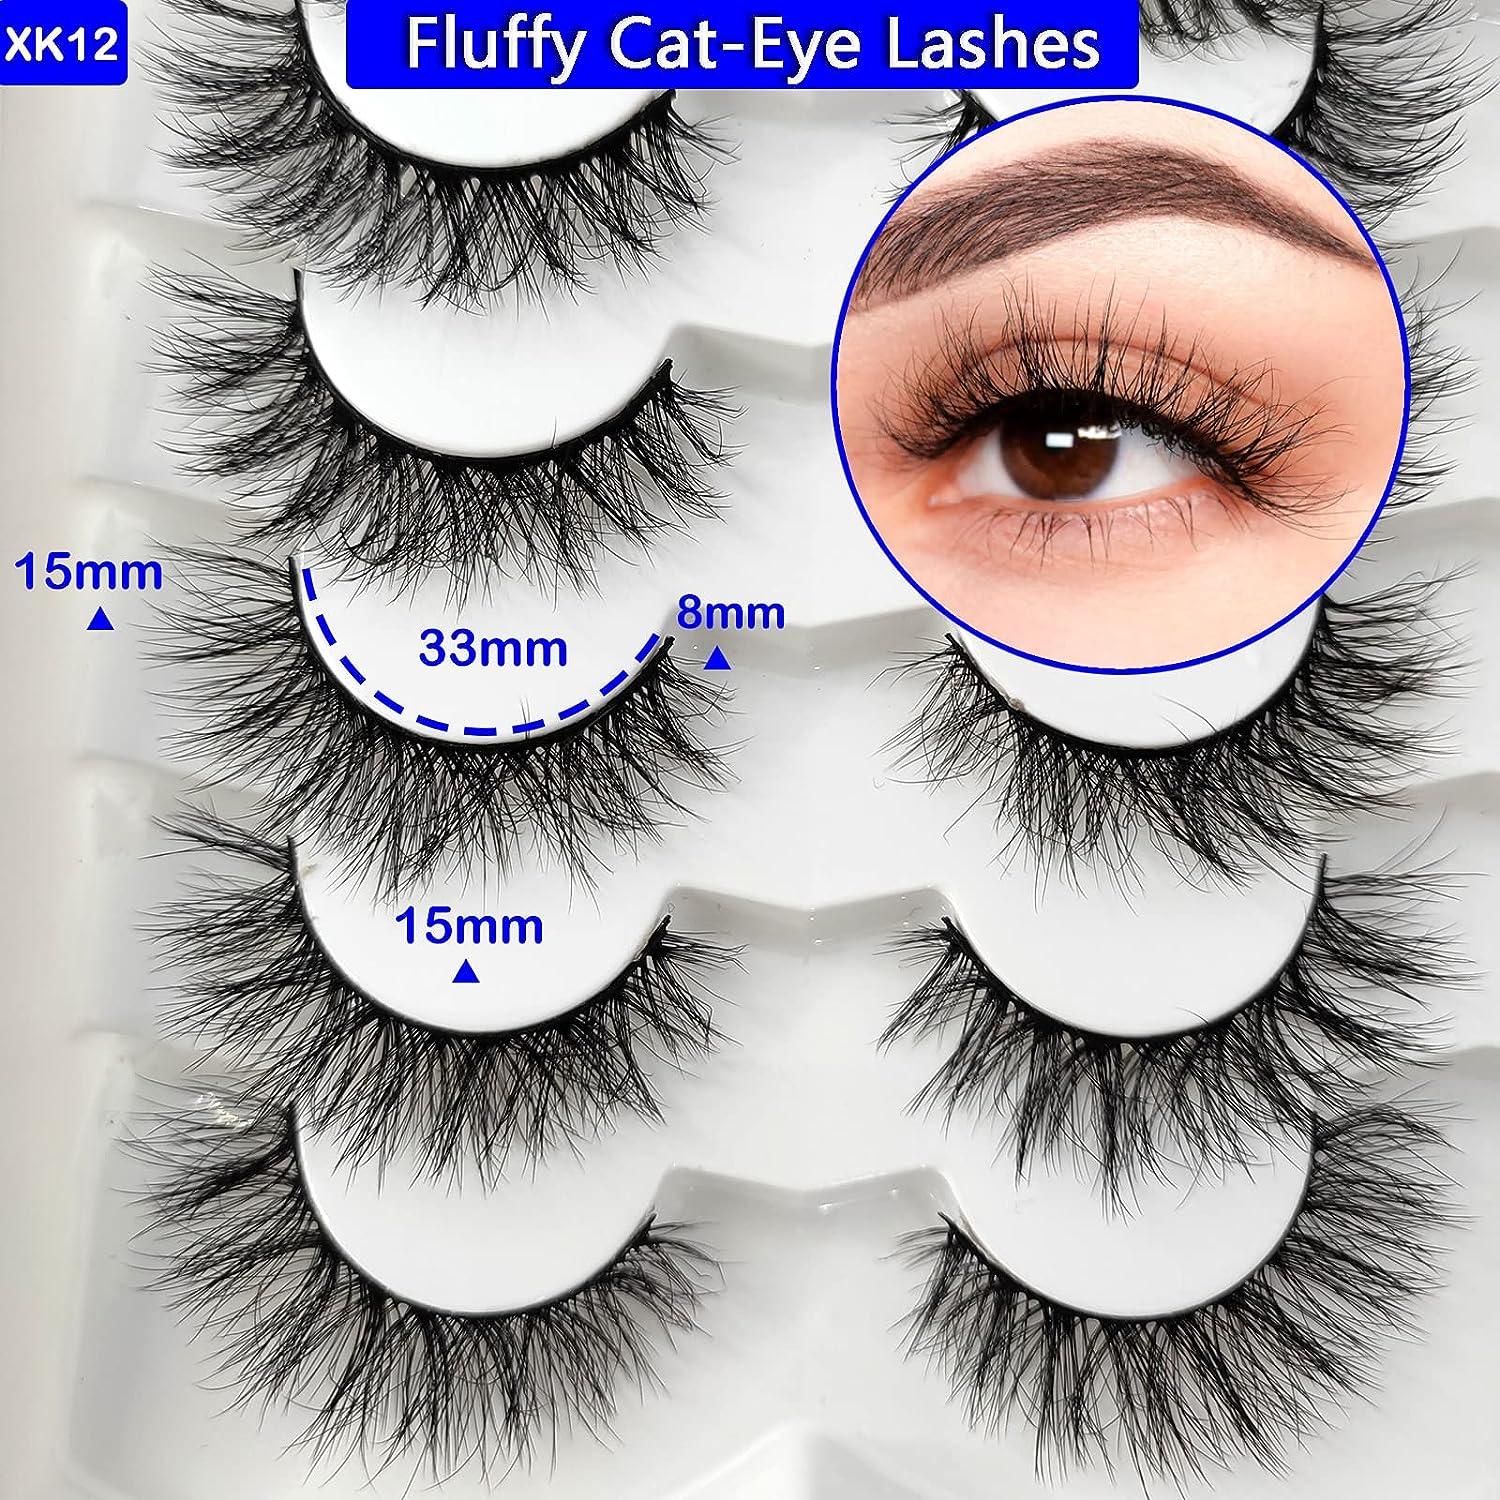 20 Pairs Short Mink Lashes Natural Look 3D Wispy 12-18mm Cat-Eye Faux Mink  Lashes Fluffy 4 Styles Mixed Natural Wispy False Eyelashes Pack by Heracks  (F-01) 20 Pair (Pack of 1) Fluffy Lashes-A